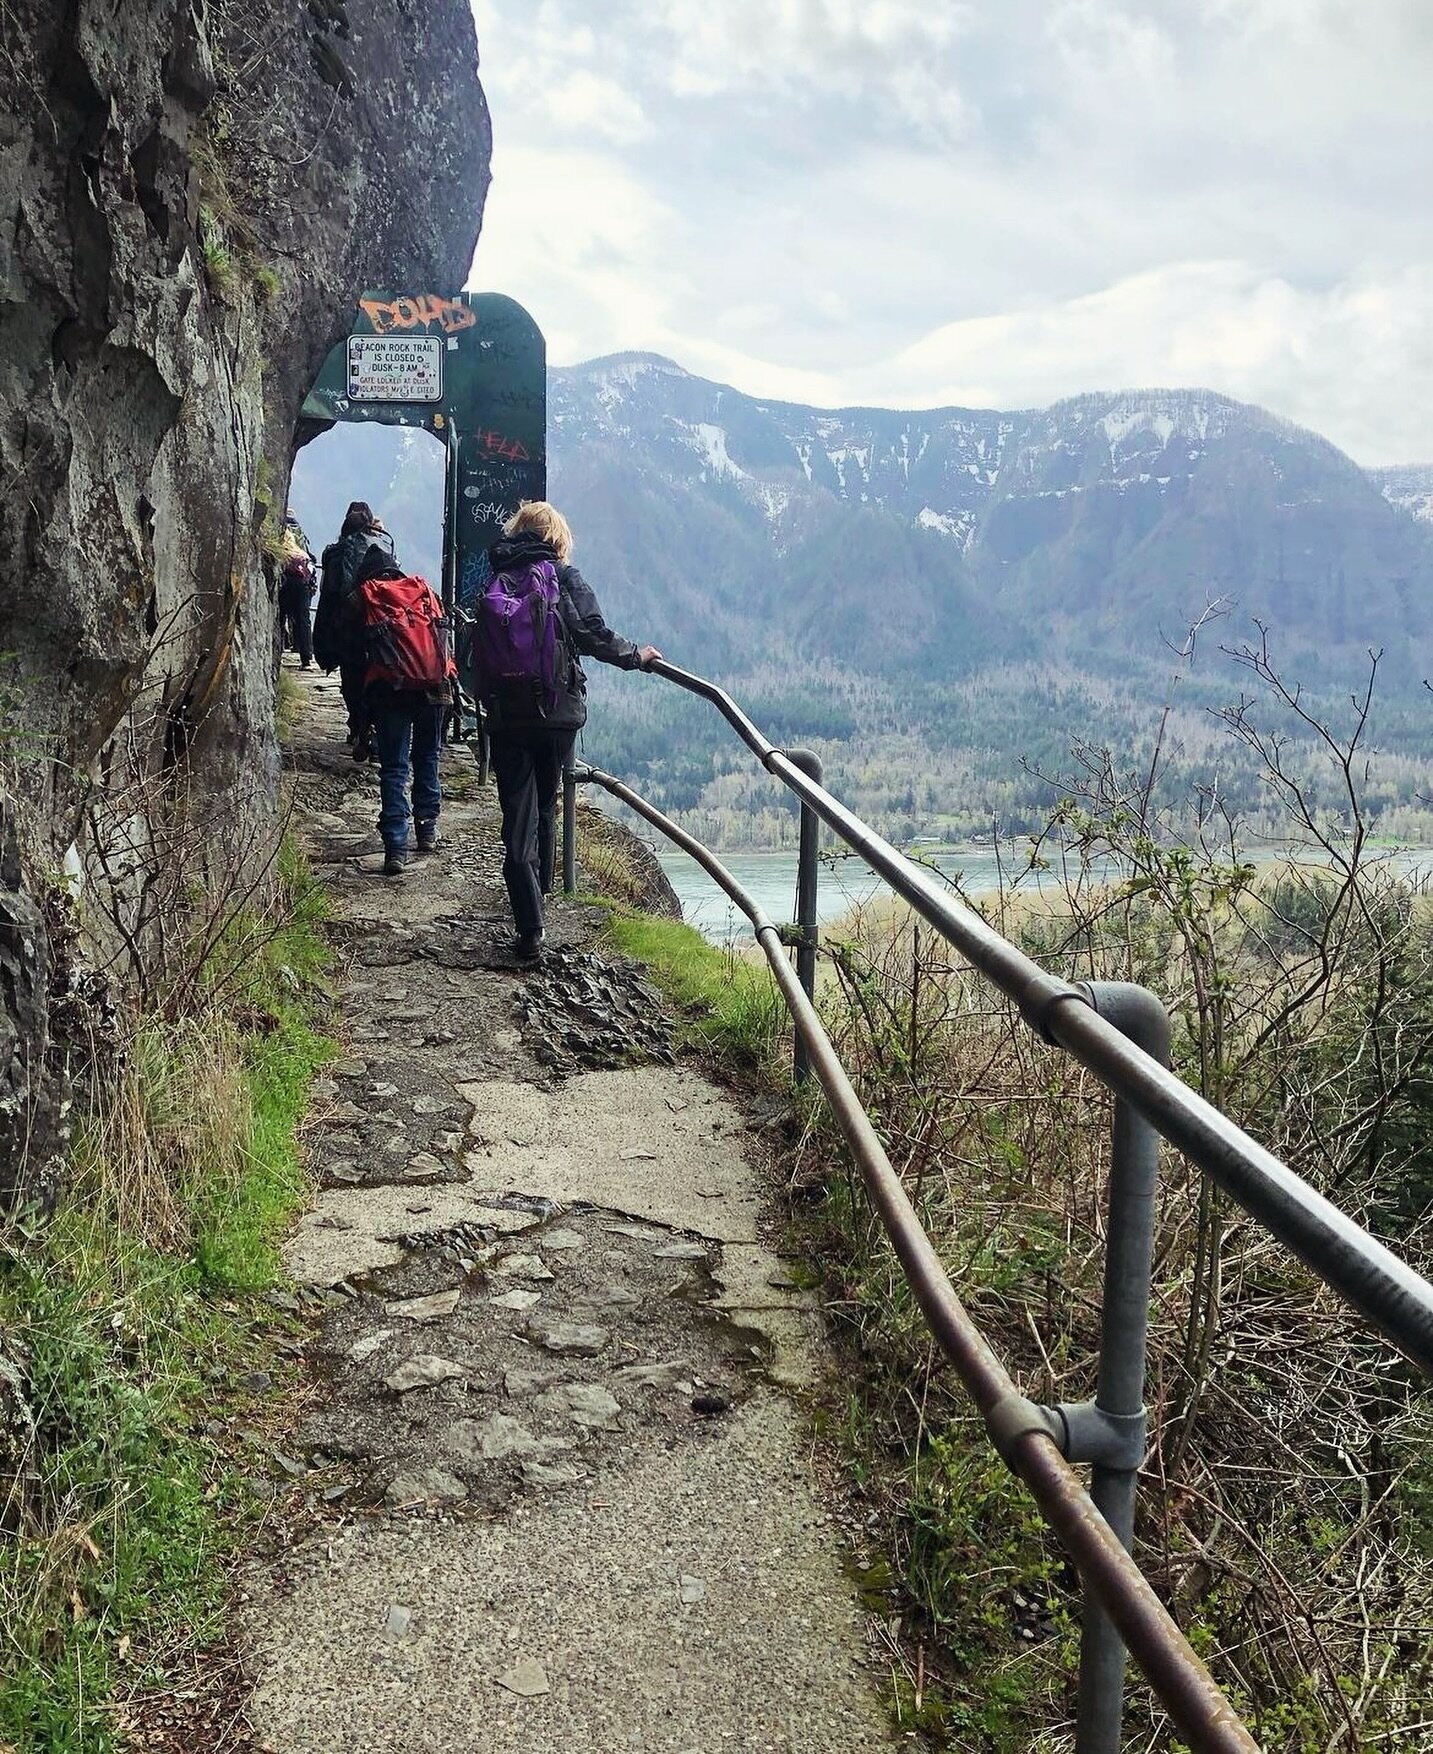 The middle school hiked Beacon Rock to study regional geology and the way that the ice age shaped the Columbia gorge.
🌿

#forestschool #middleschool #handsonlearning #learningisfun #learningoutside #learningoutsidetheclassroom #natureeducation #outd